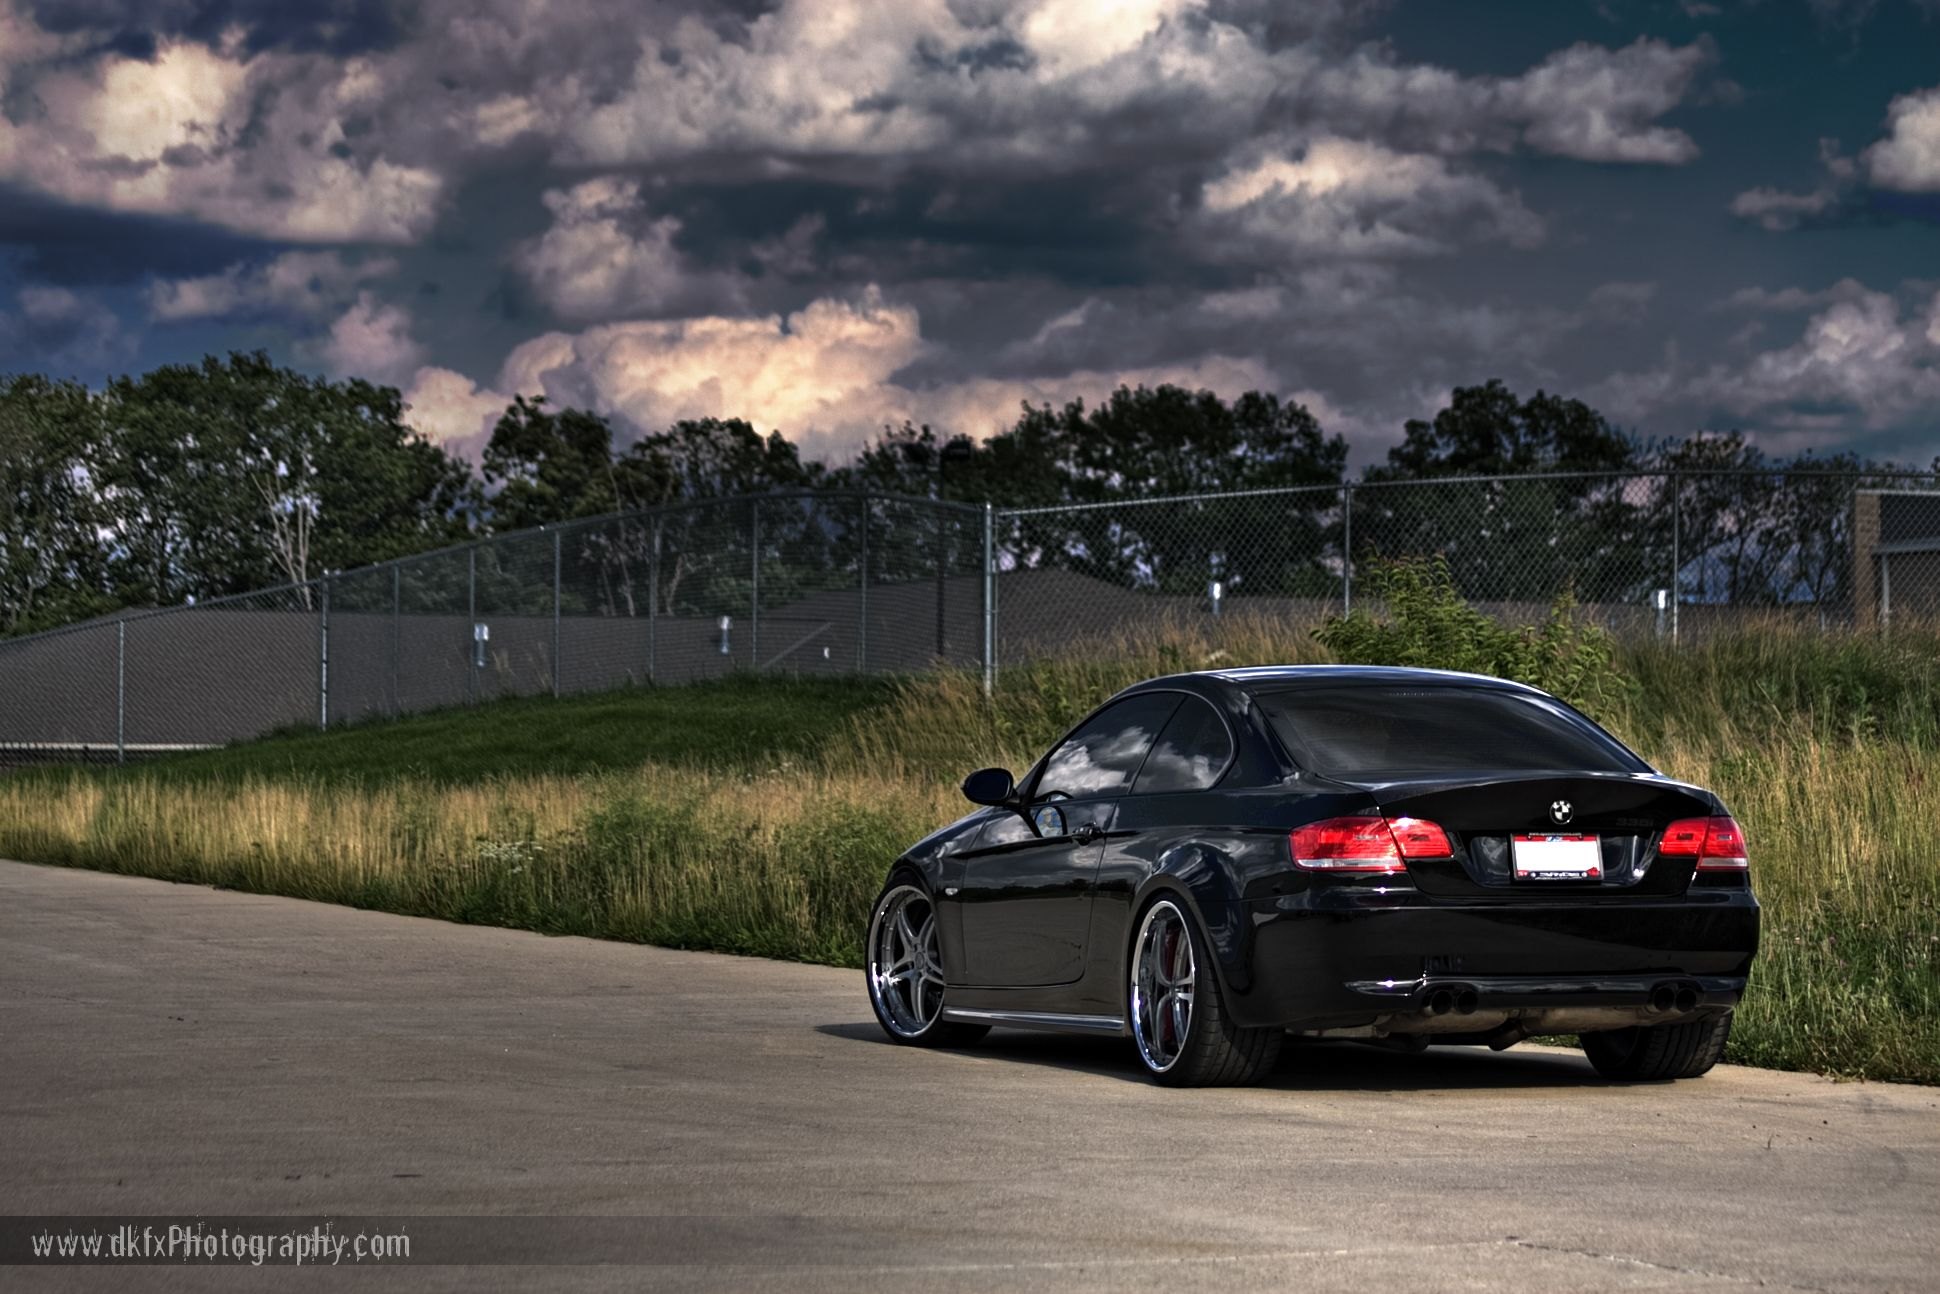 Black BMW 3-Series with Aftermarket Rear Diffuser - Photo by dan kinzie